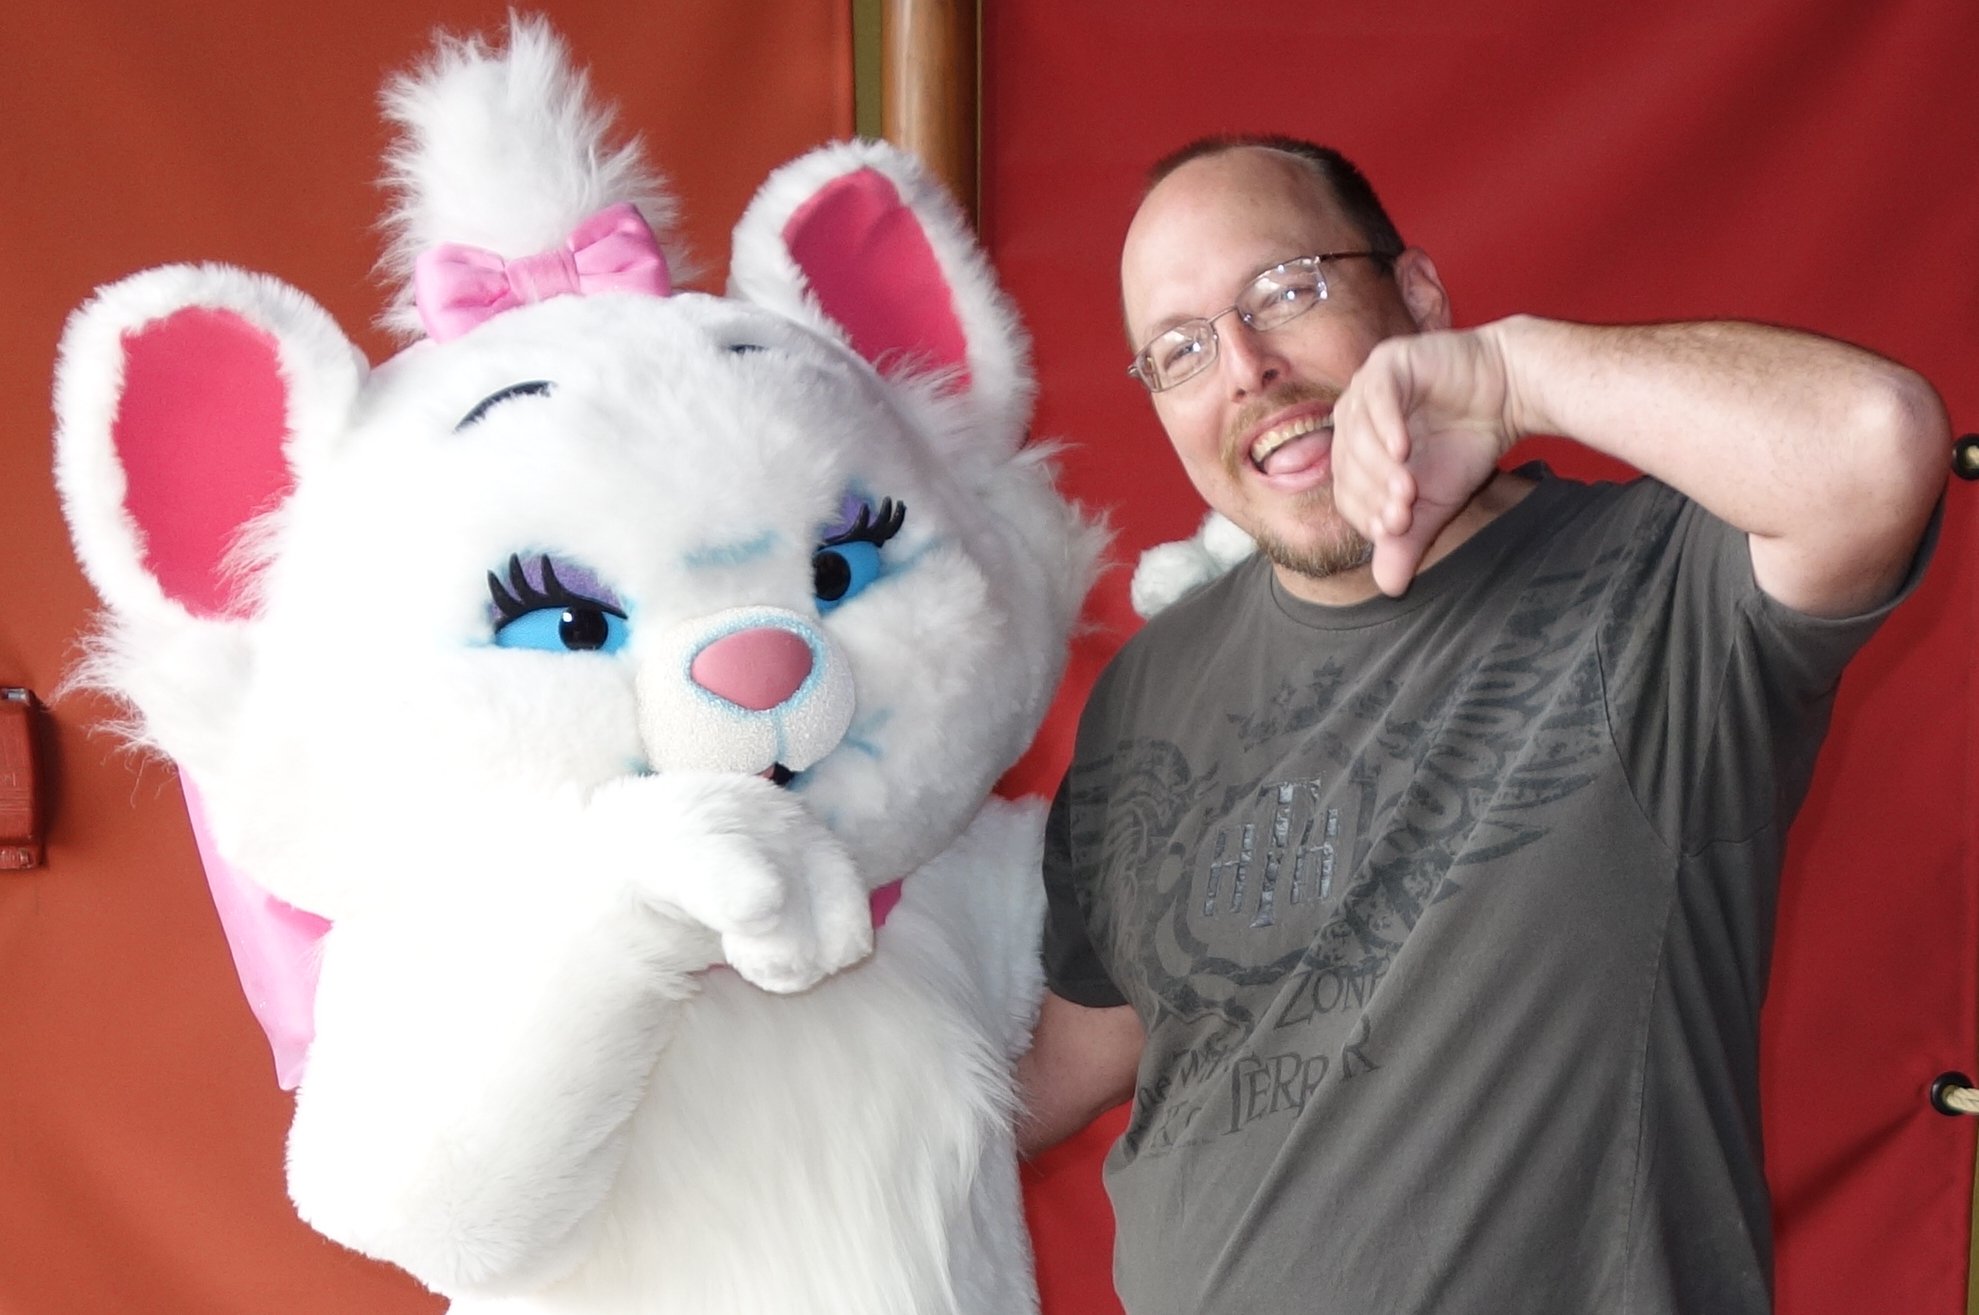 I enjoy interacting with the characters and not just taking a standard photo.  Marie told me that it looked like I need a quick cleaning for our formal pose.  We began by licking our paws.